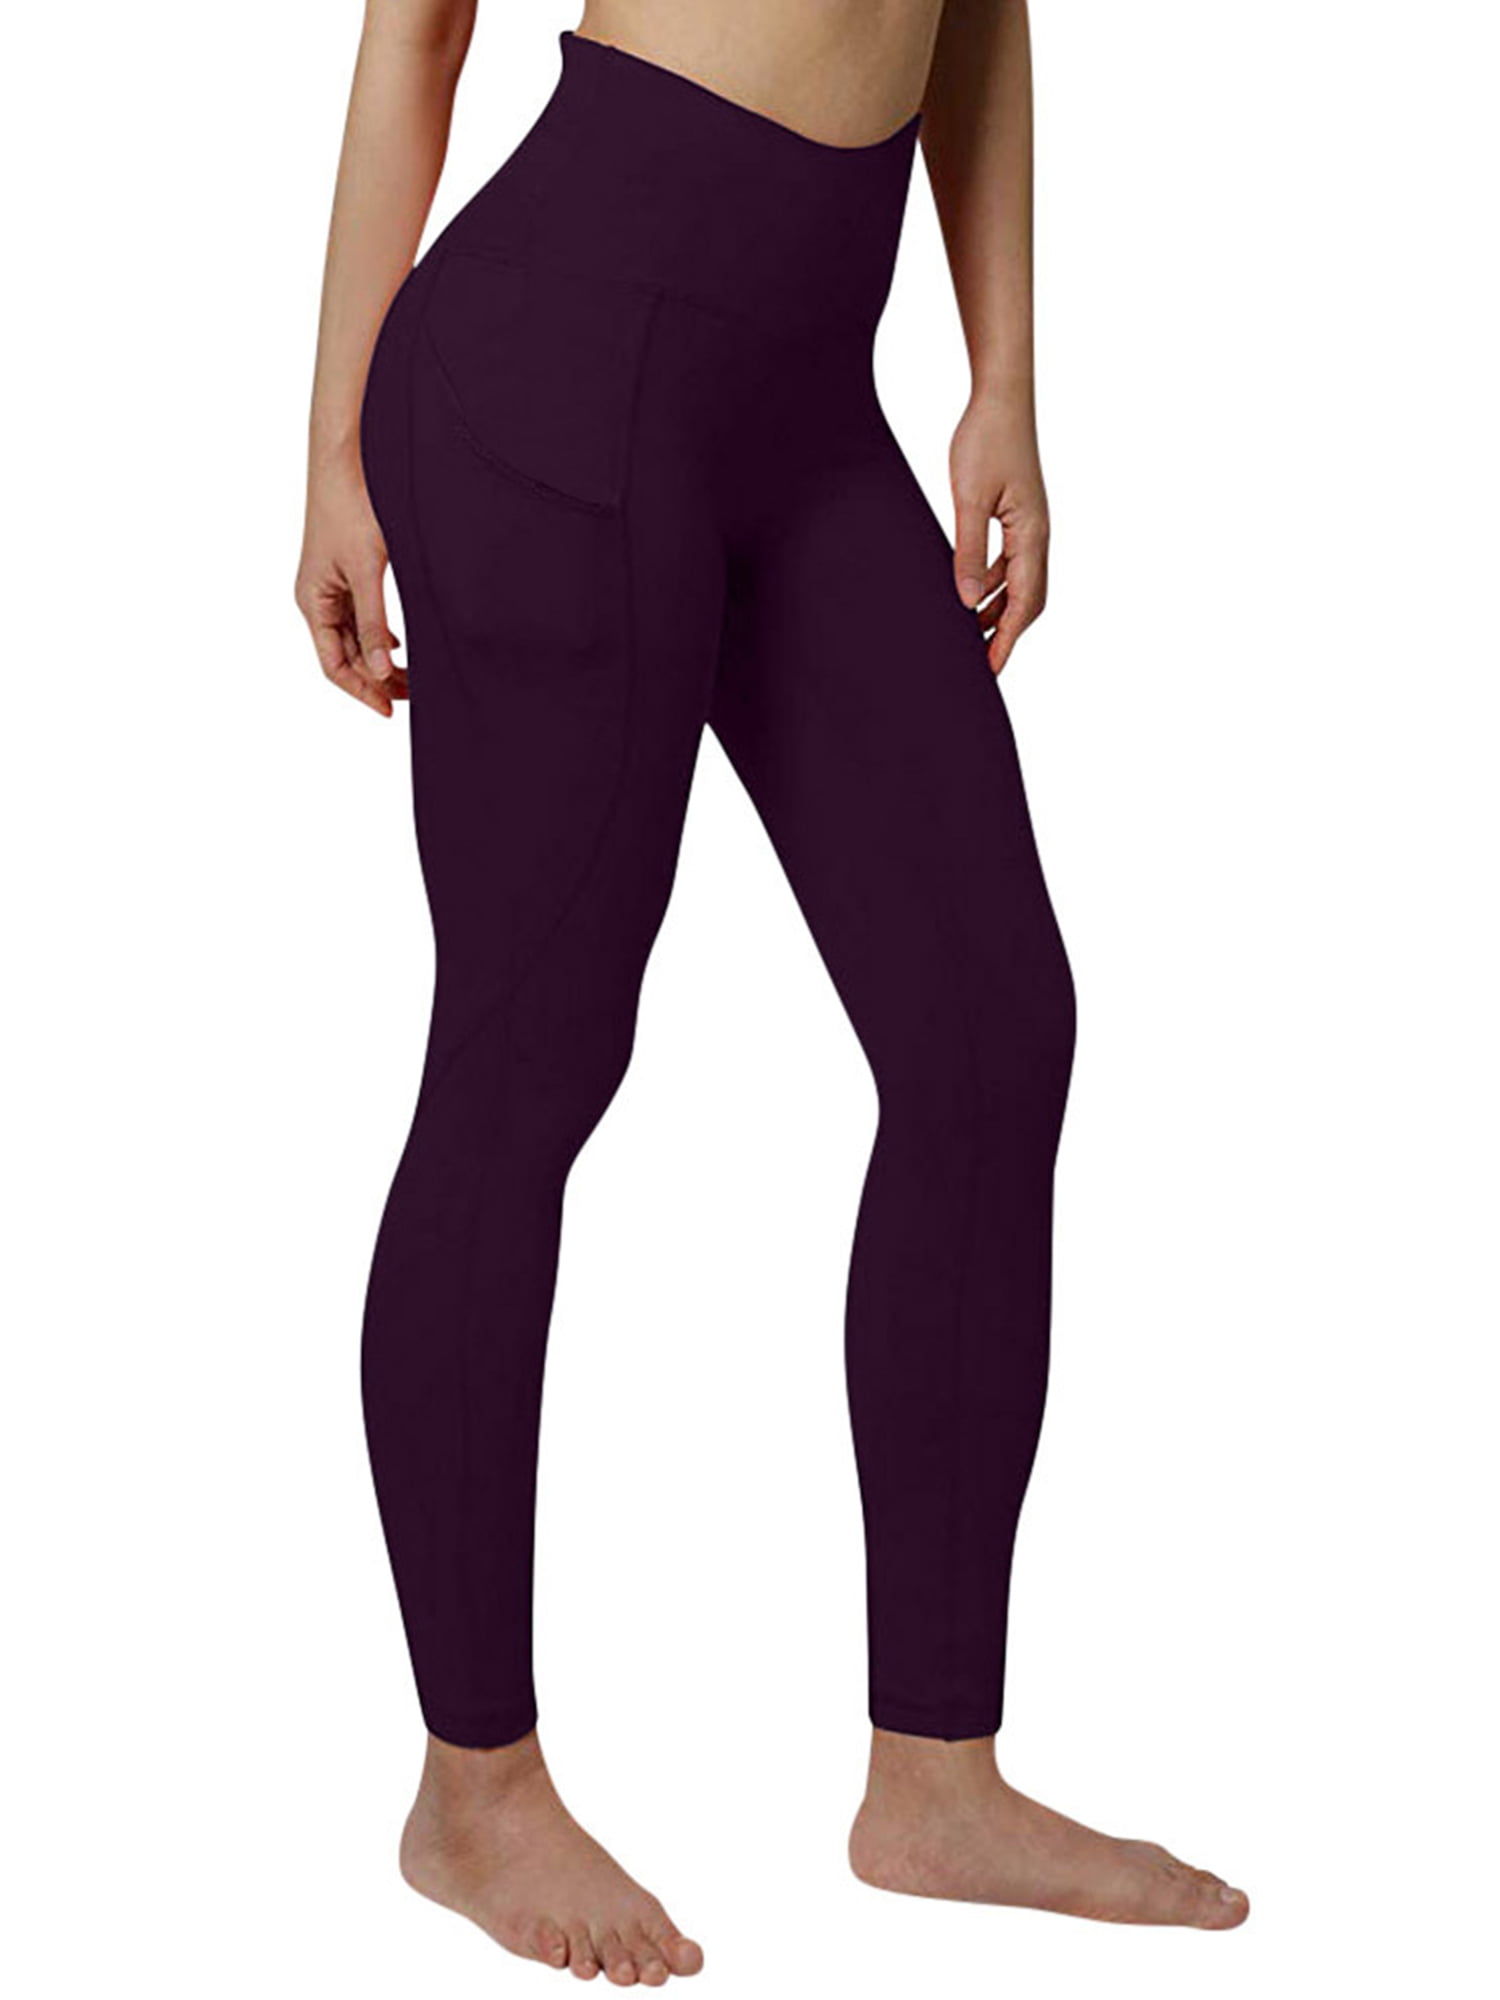 Frontwalk Workout Leggings for Women High Waisted Yoga Pants